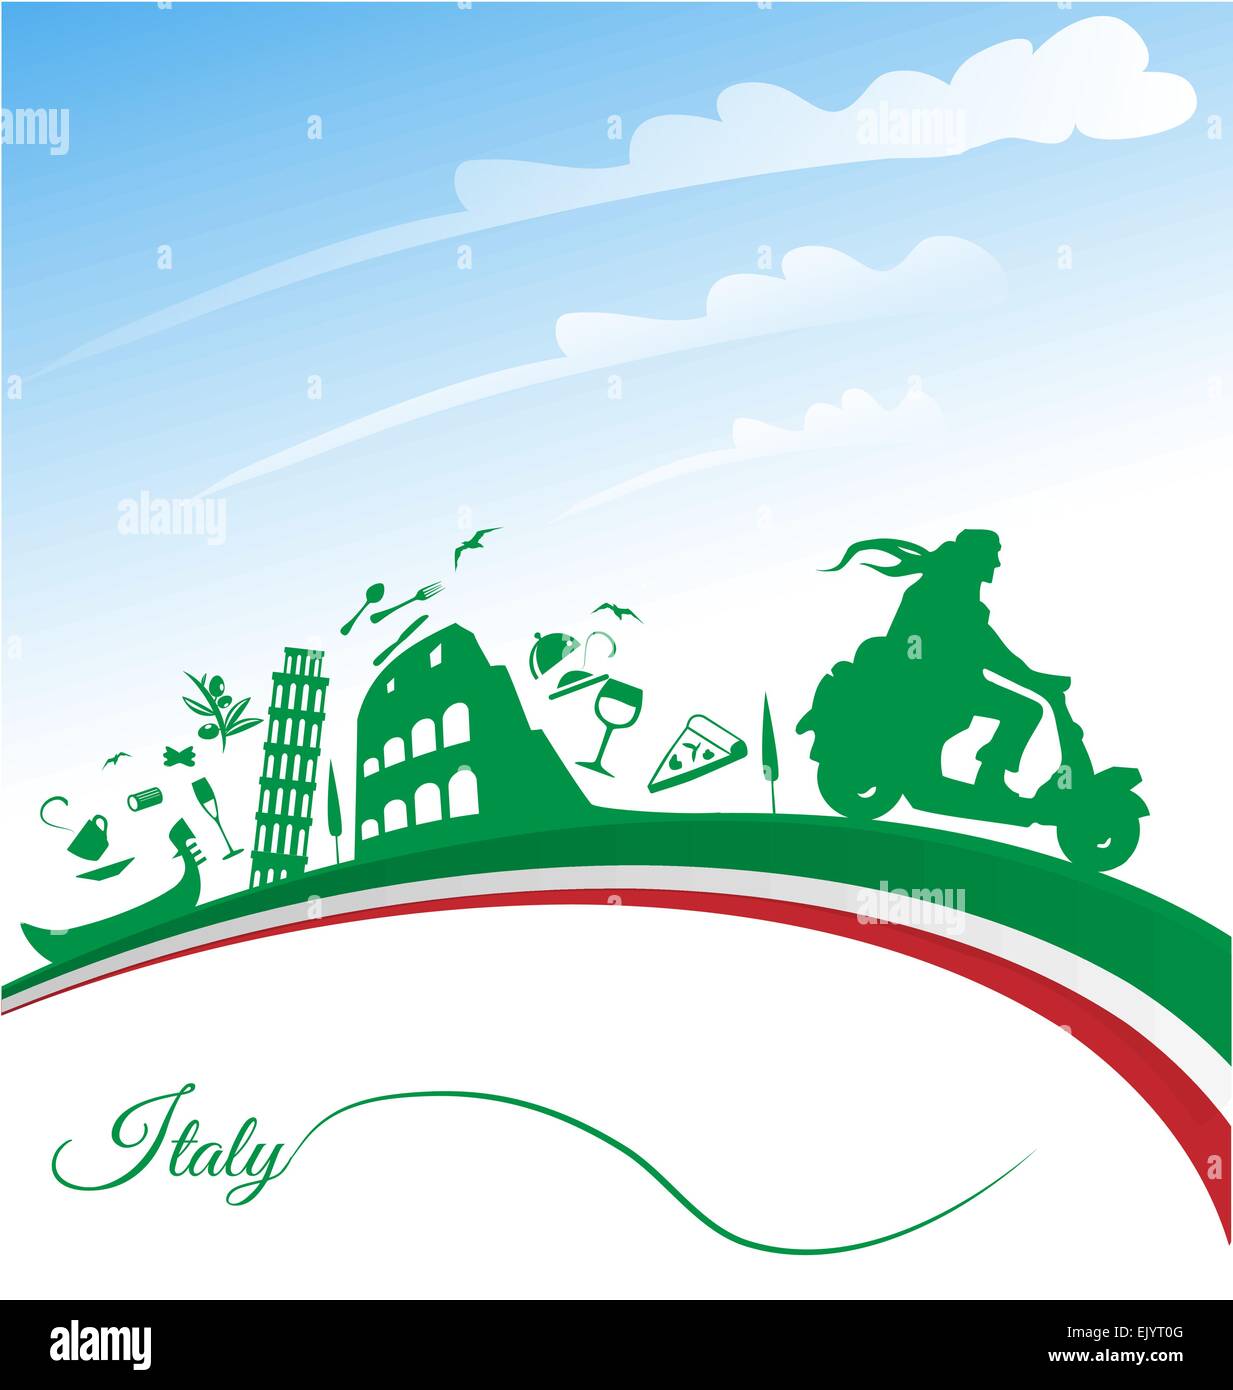 Italian holidays background with flag Stock Vector